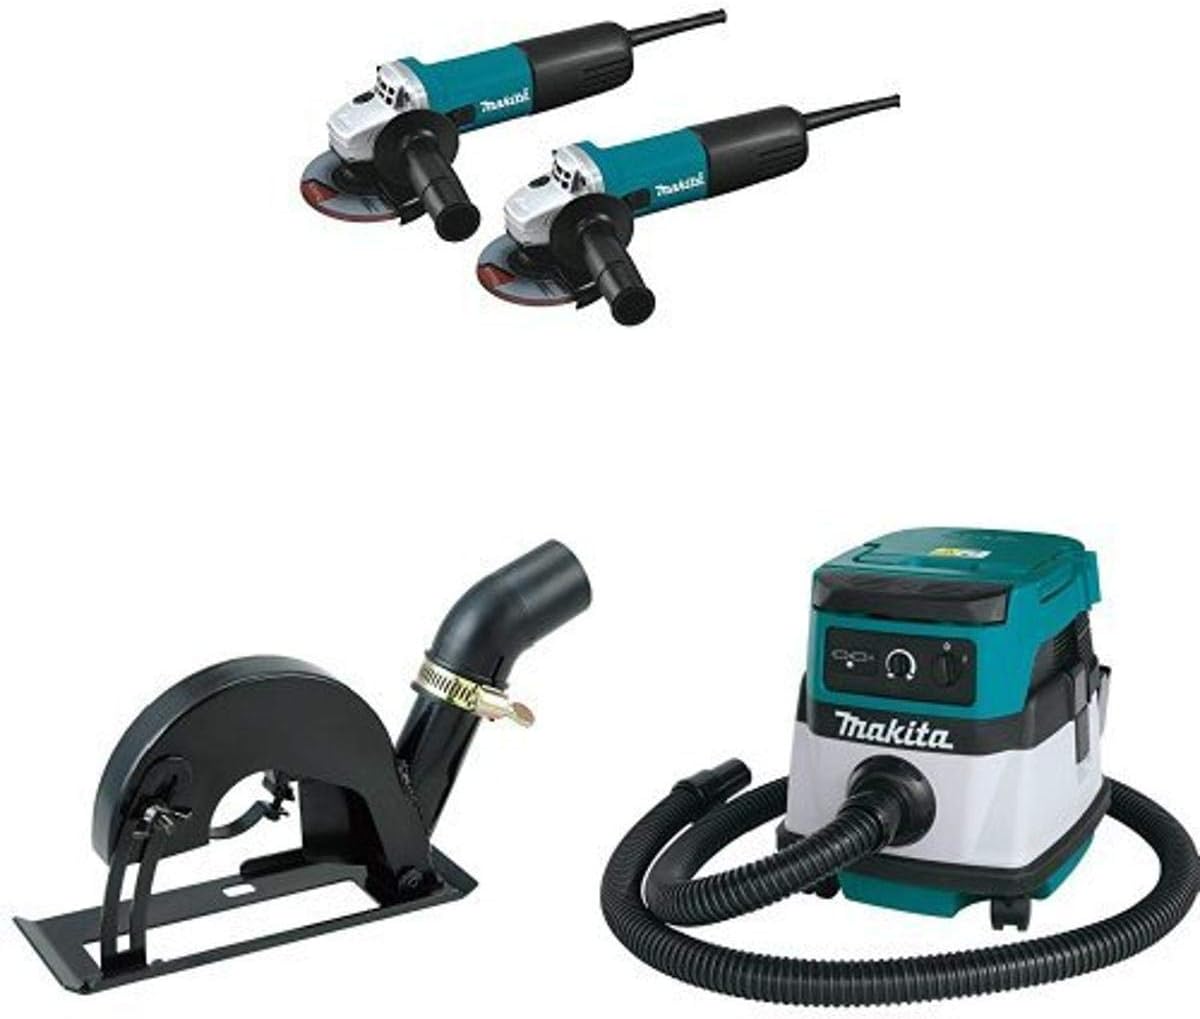 Makita 9557NB2 4-1/2-Inch Angle Grinder (2-Pack), with AC/DC Switch, 193794-5 Dust Extraction Cutting Guard,  XCV04Z 18V X2 LXT (36V) 2.1 Gallon HEPA Filter Dry Dust Extractor/Vacuum